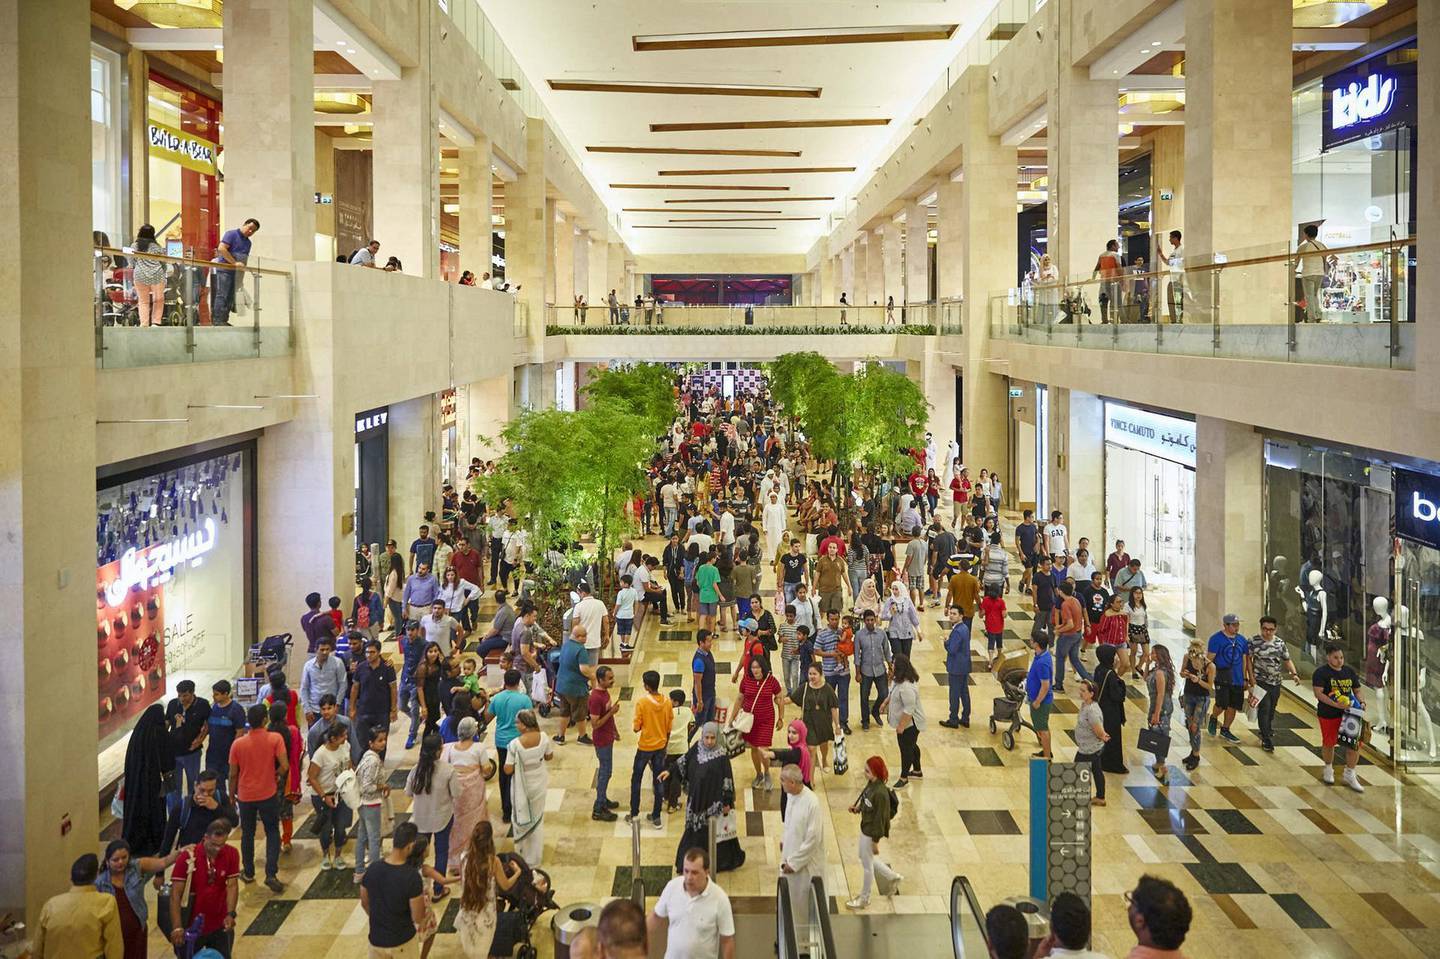 Yas Mall is one of 15 malls across Abu Dhabi and Al Ain taking part